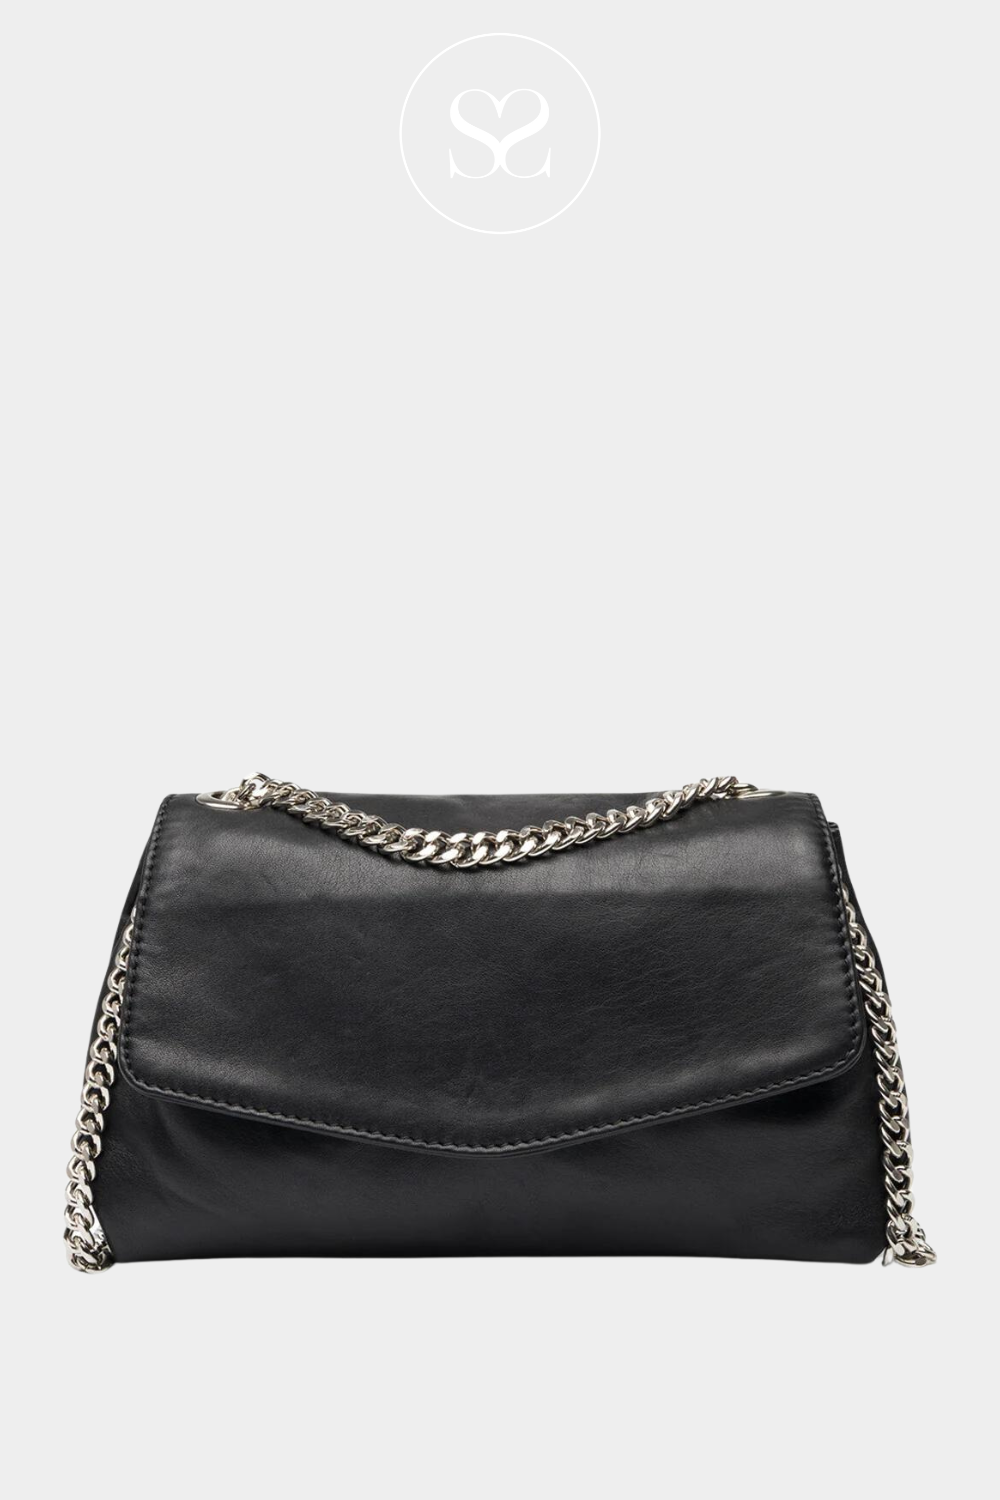 Black Leather Crossbody shoulder Bag with silver chain strap